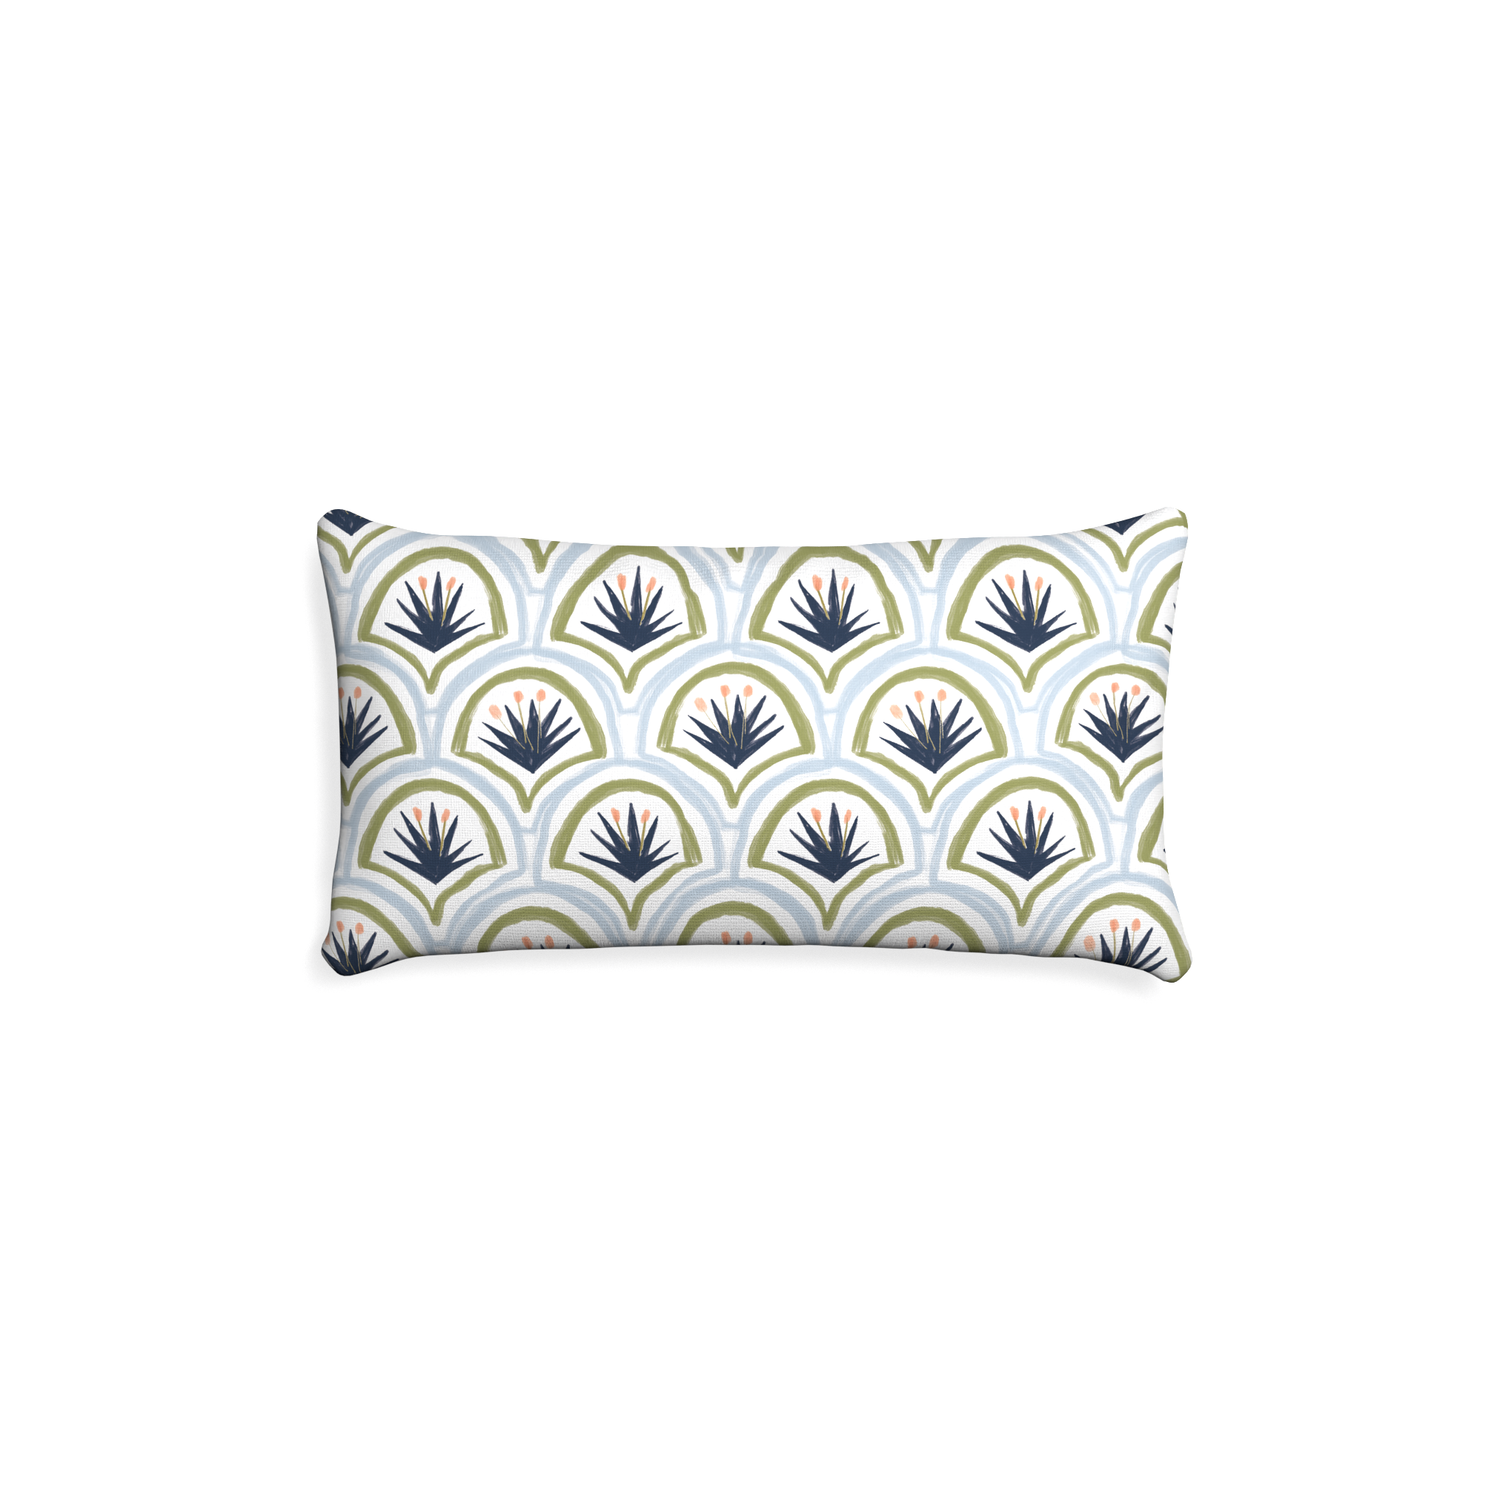 Petite-lumbar thatcher midnight custom art deco palm patternpillow with none on white background